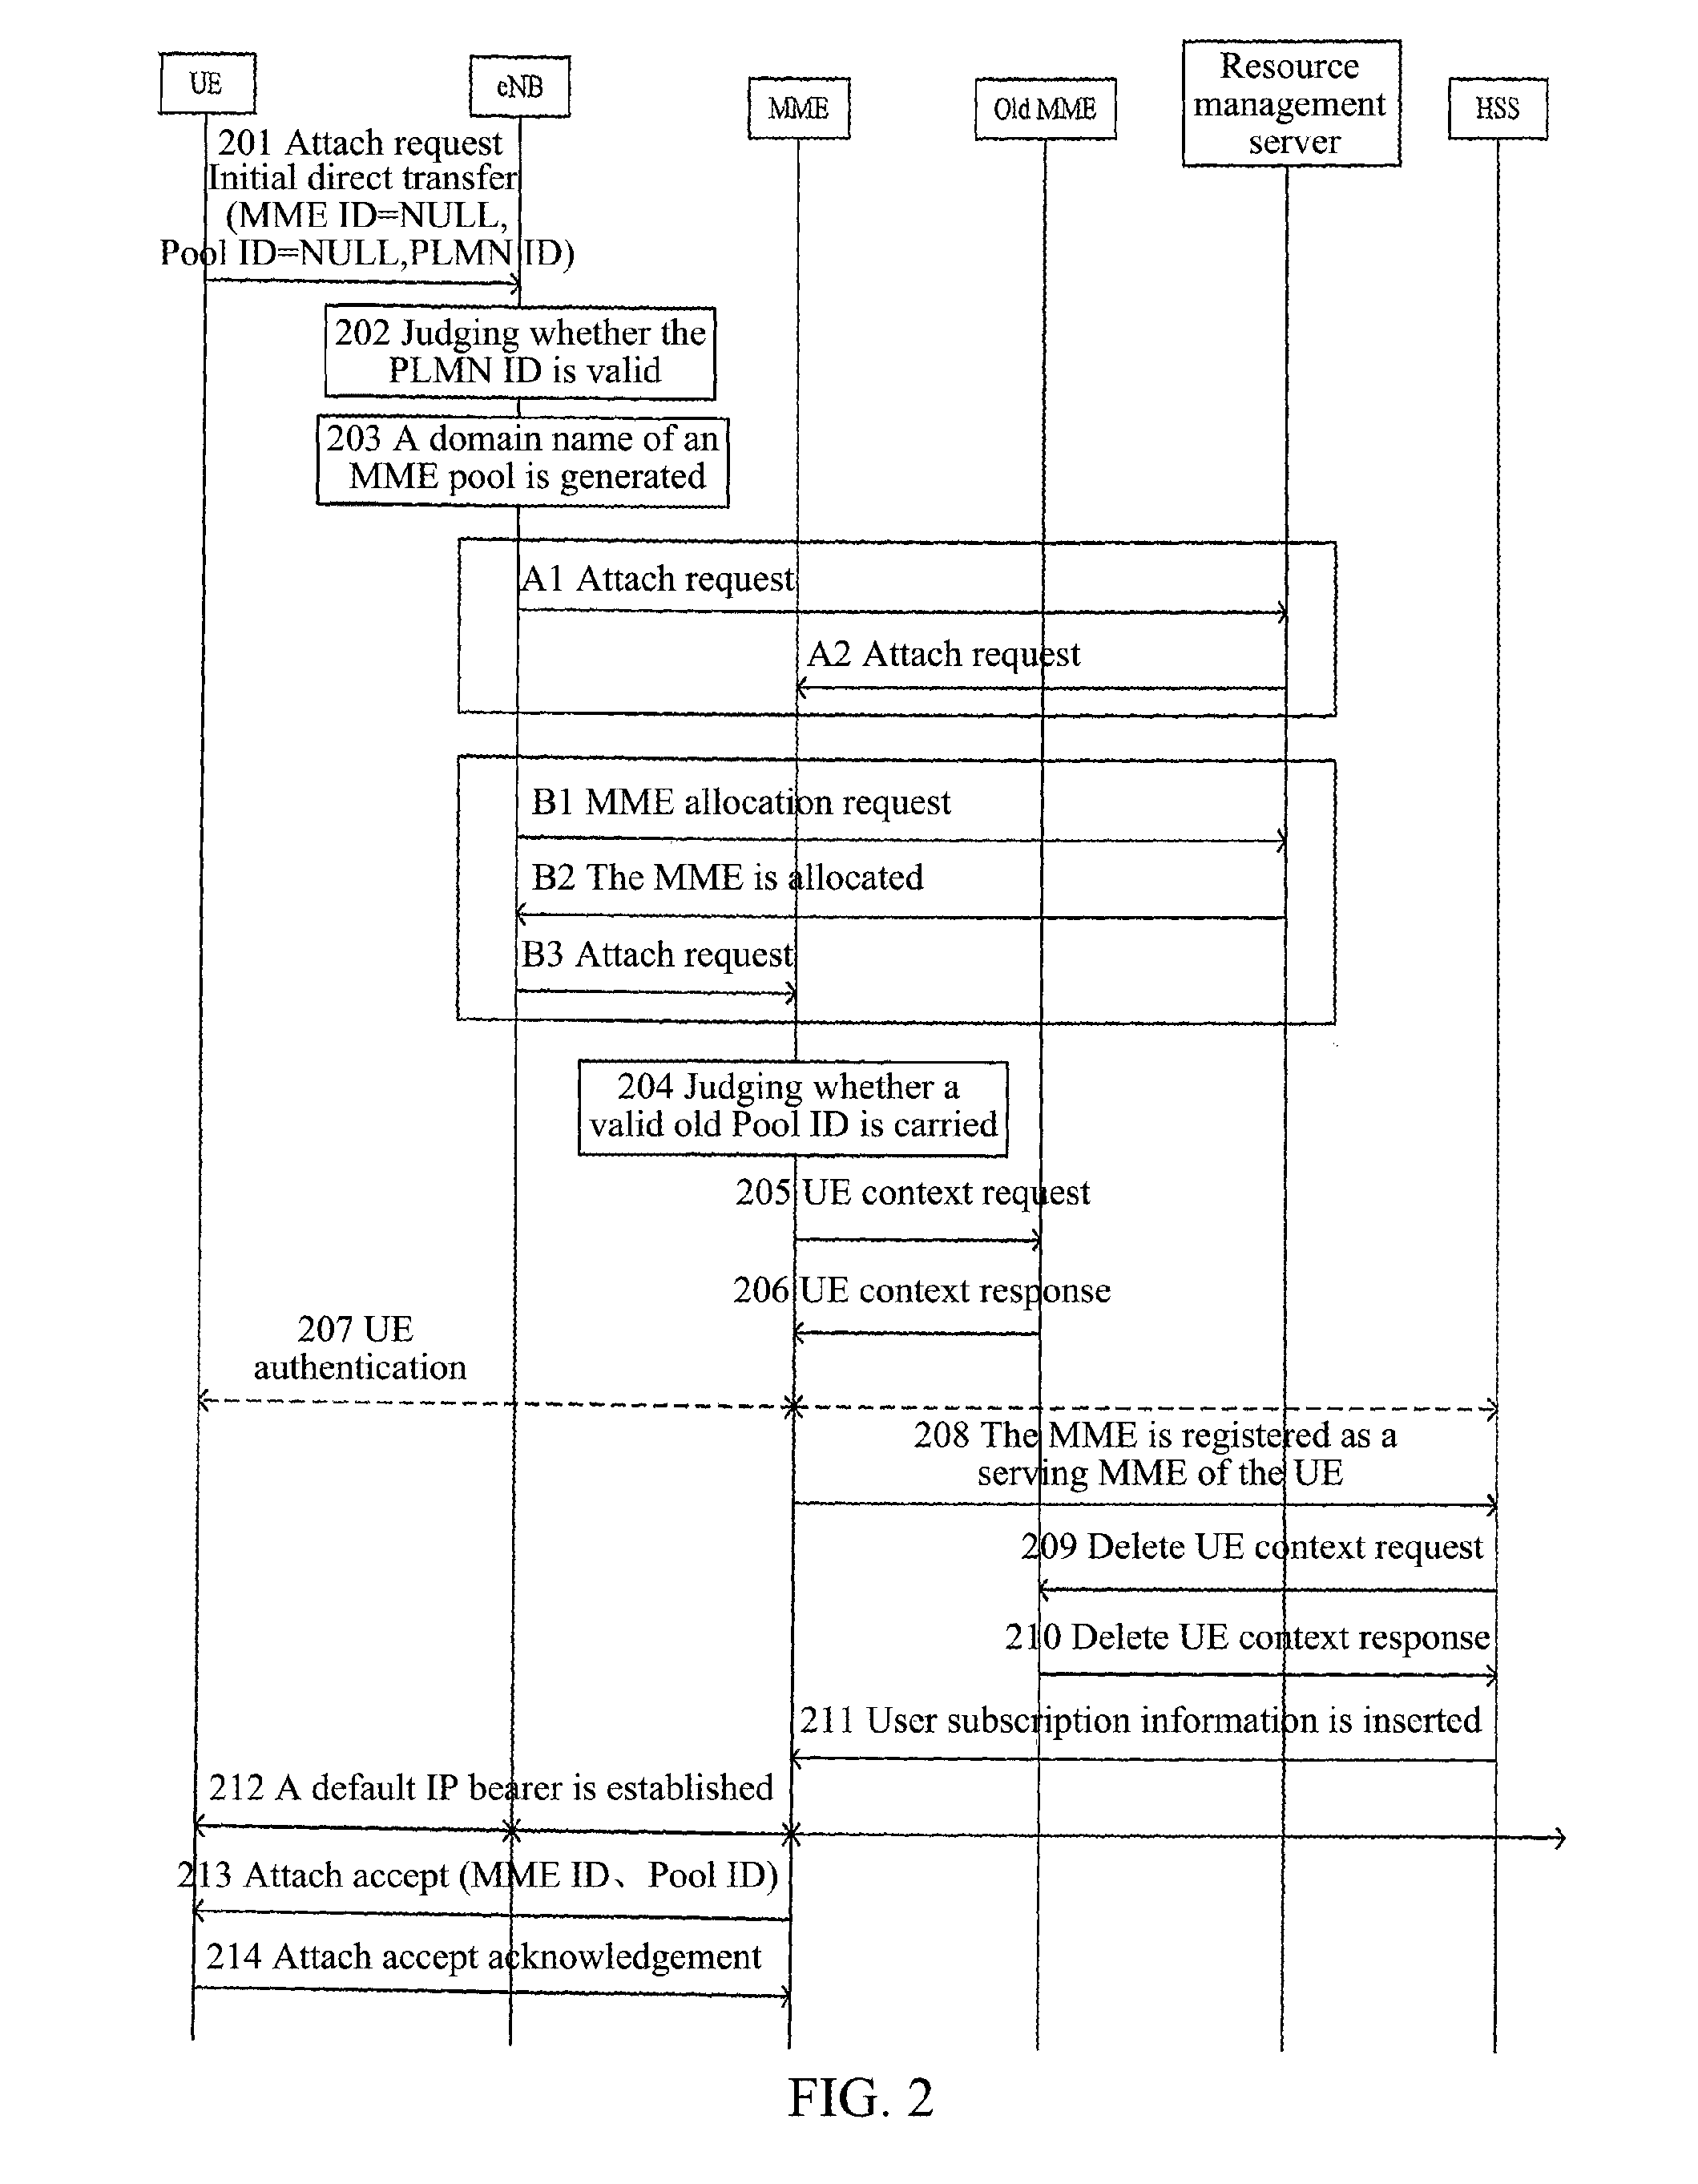 Mobile Terminal Registration Method in a Radio Network